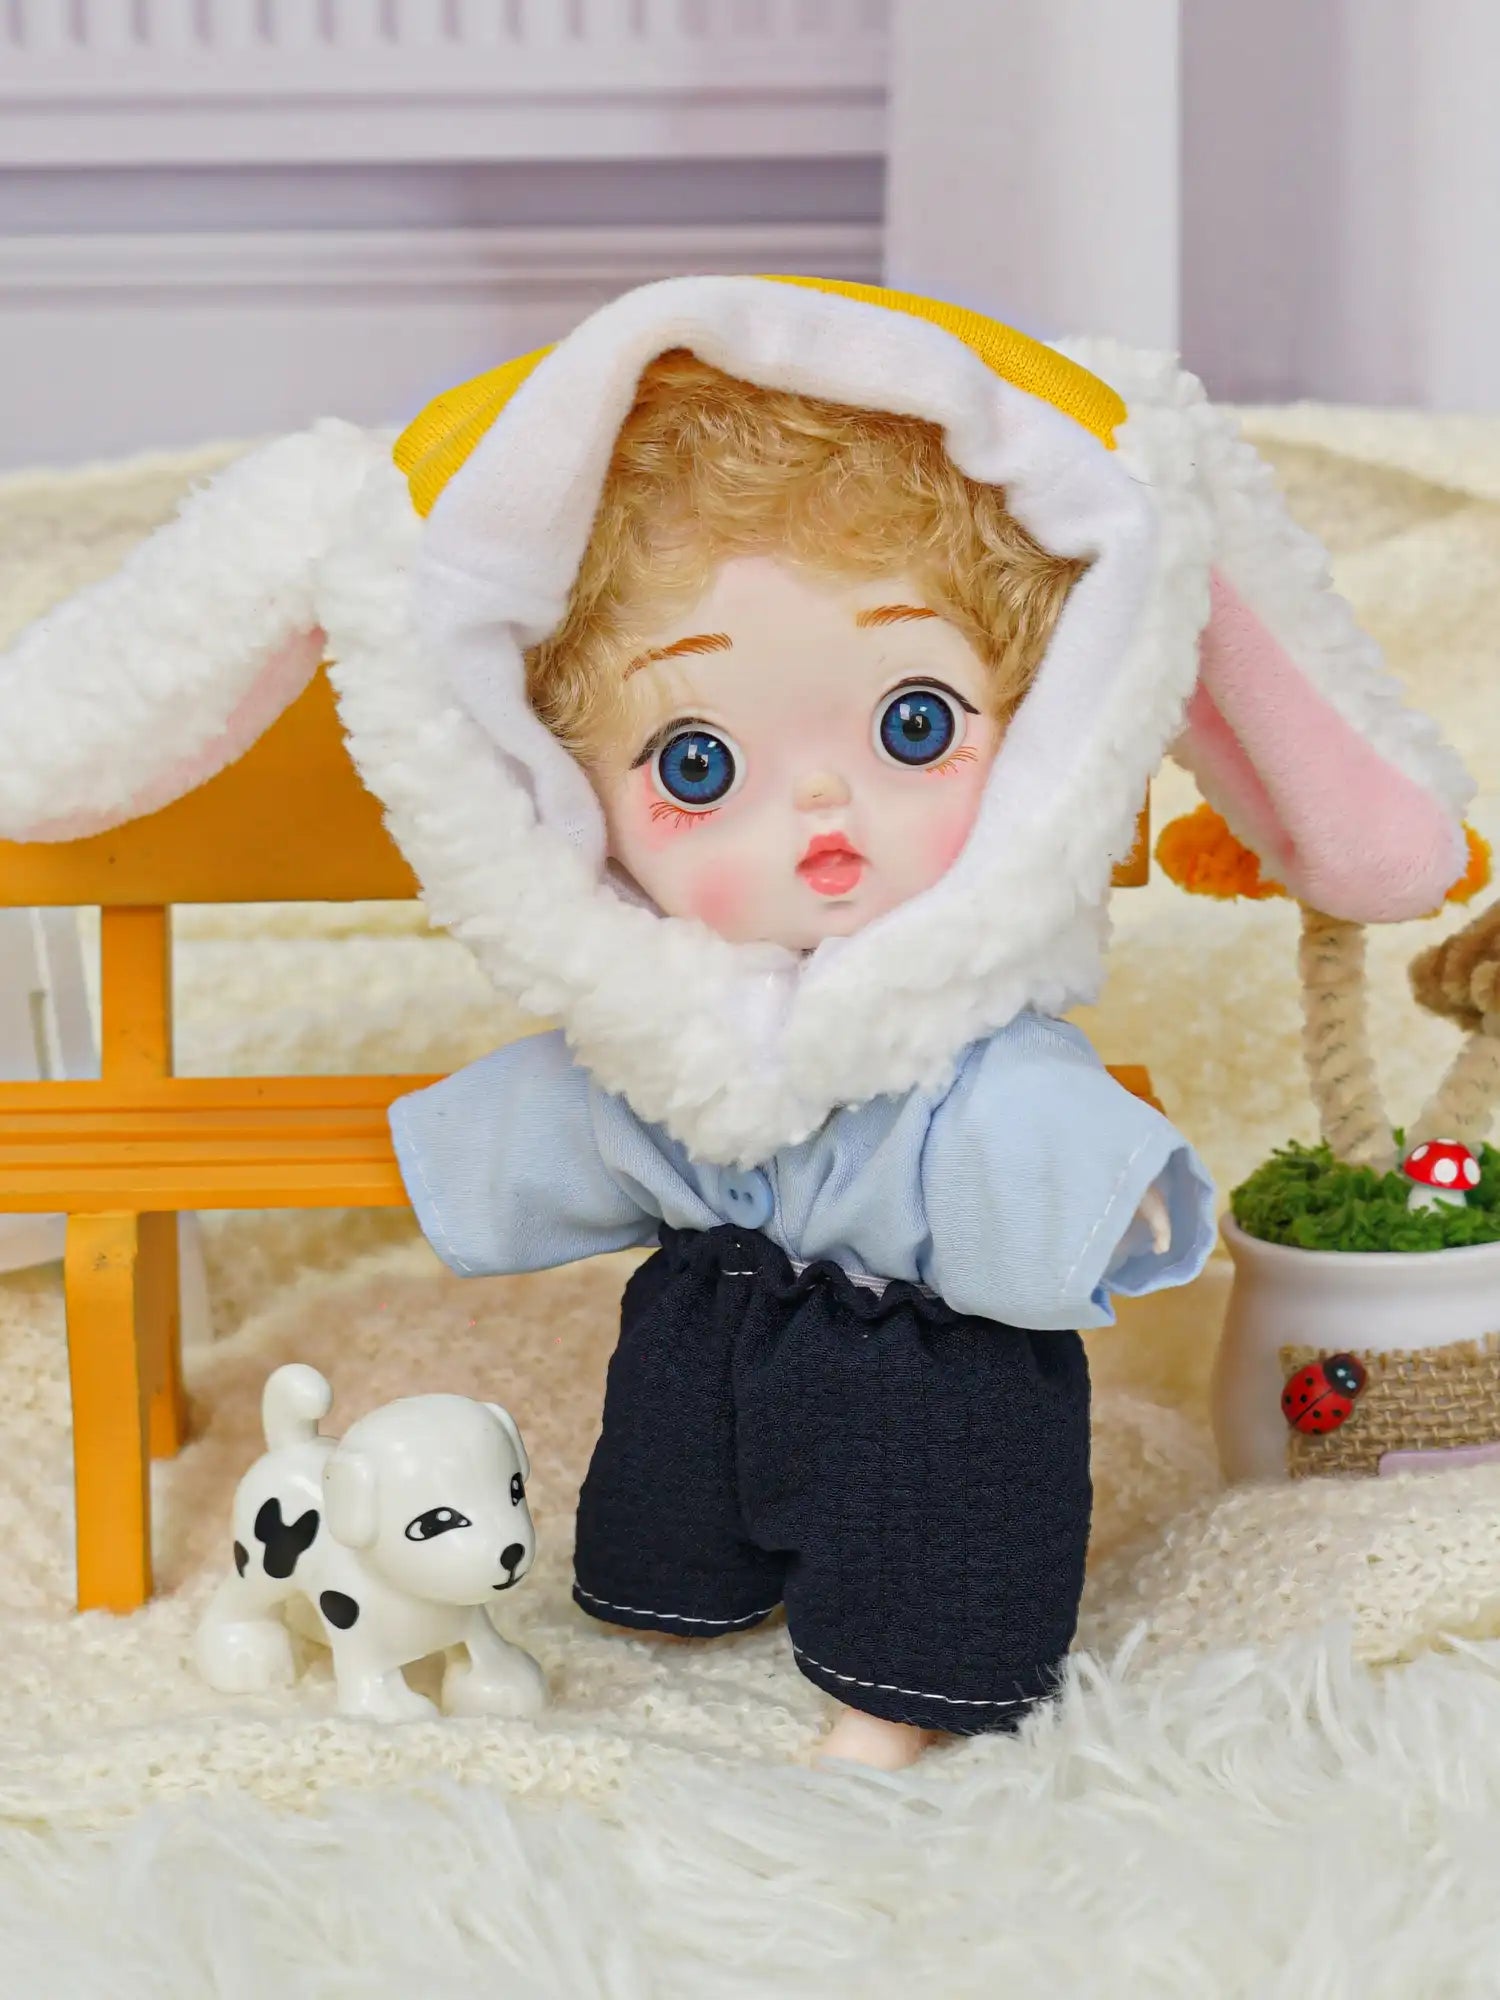 A charming doll with blue eyes and a lamb hood, seated next to a whimsical animal figure and colorful miniatures.